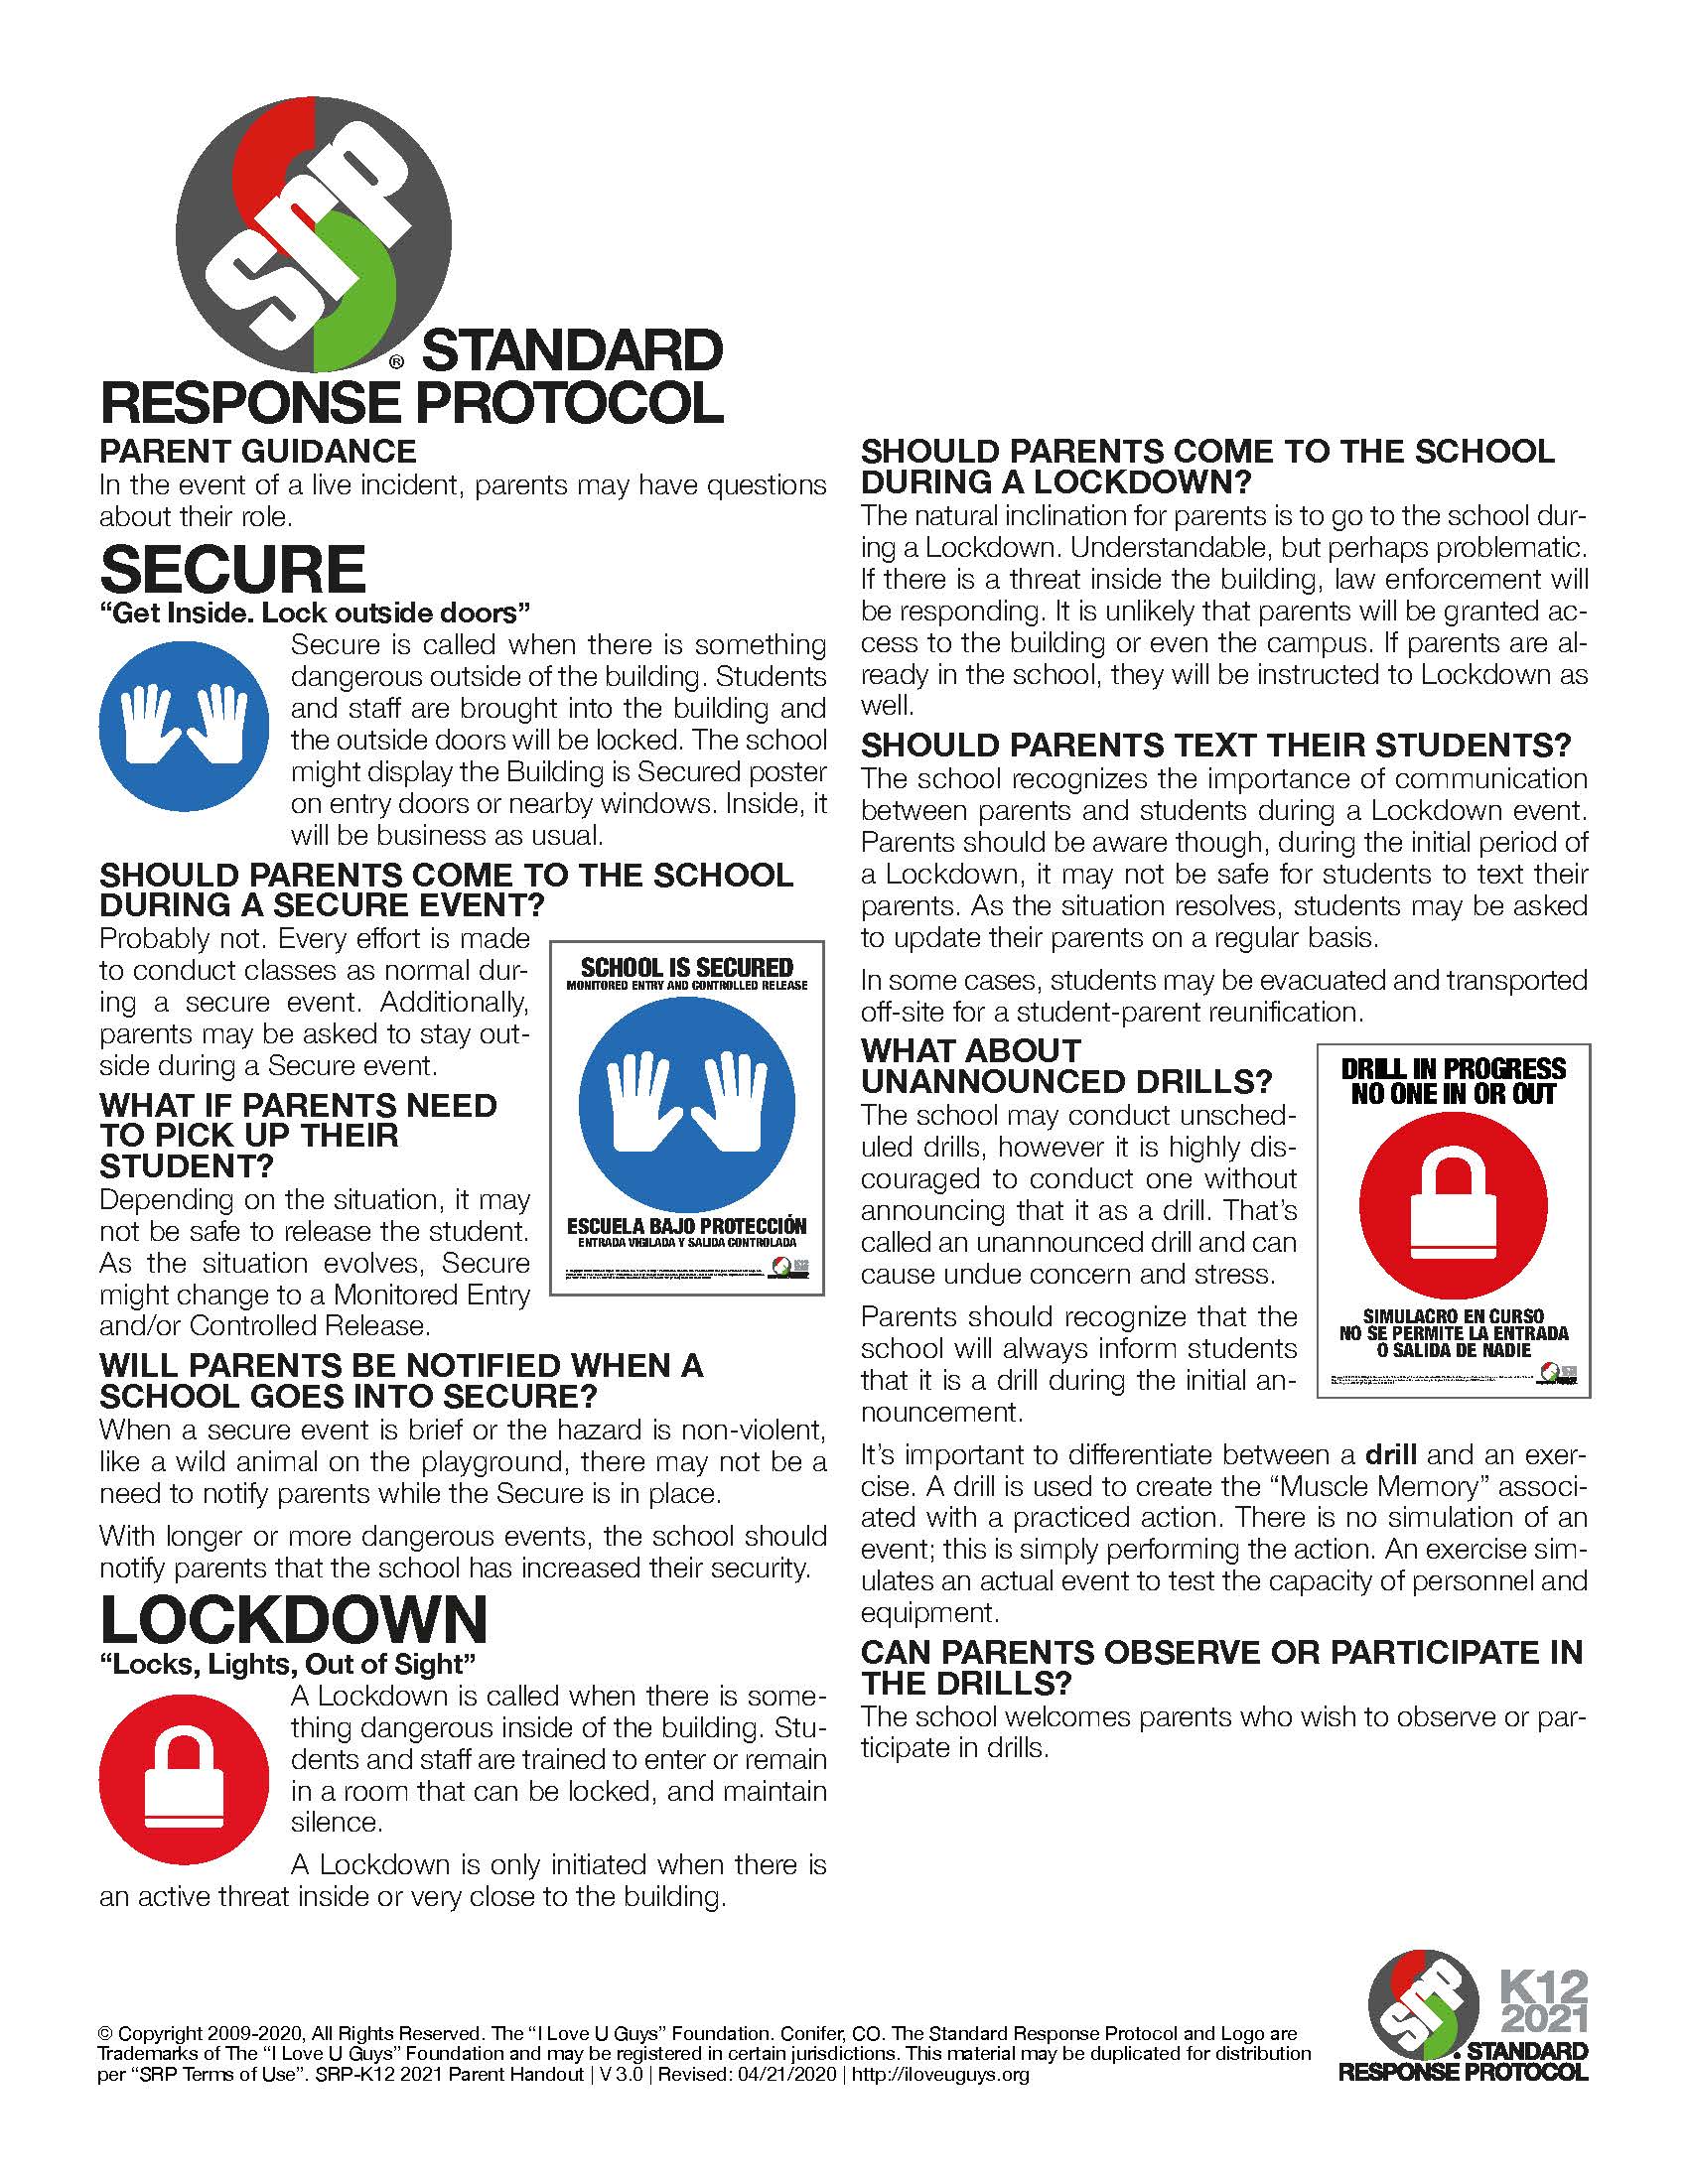 second page of Standard Response Protocol